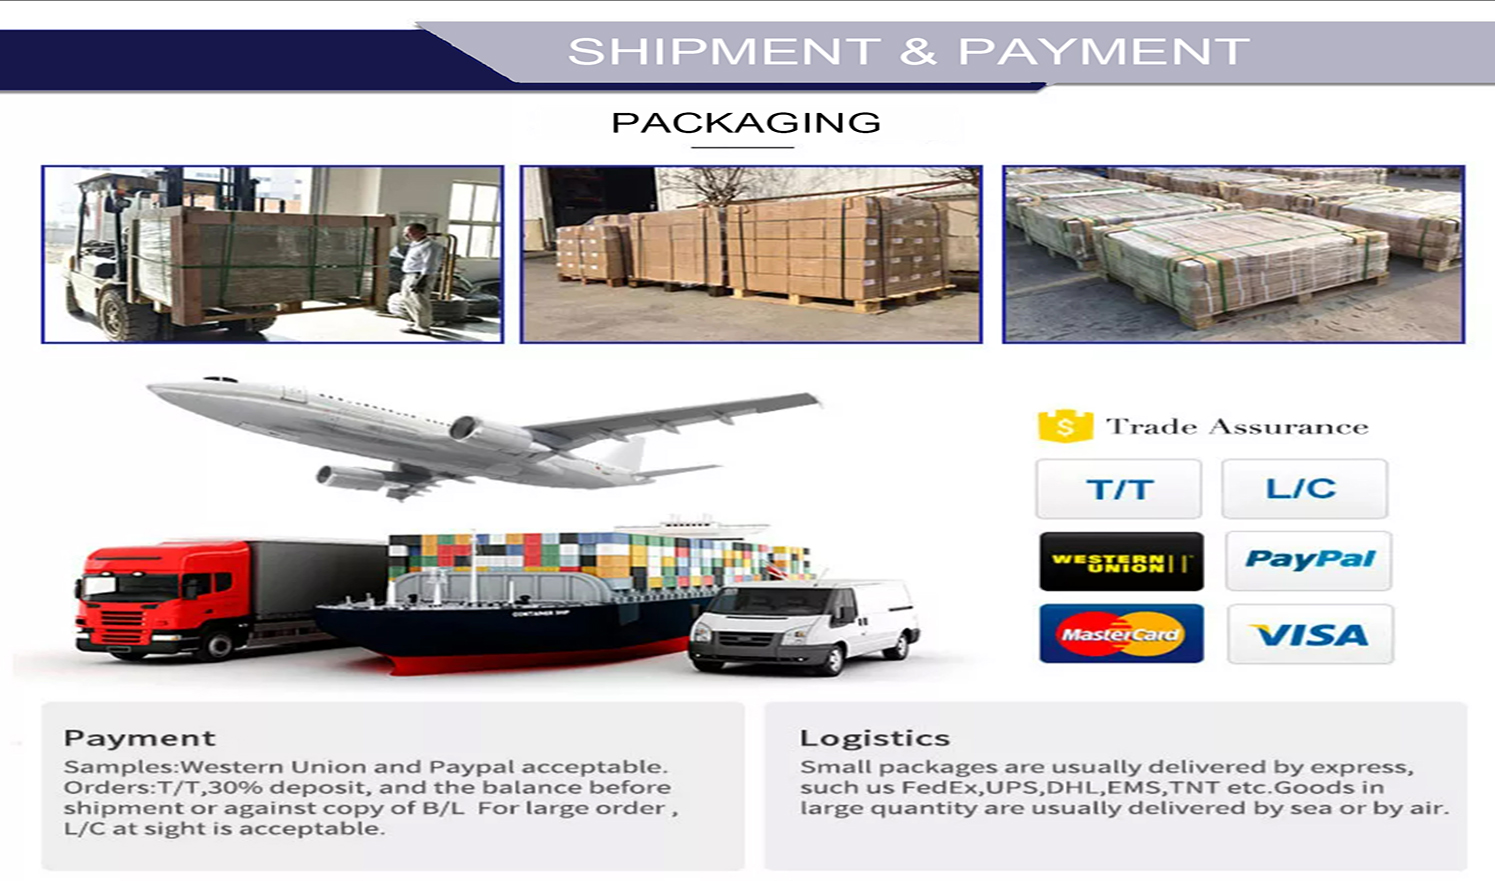 Shipping & Payment